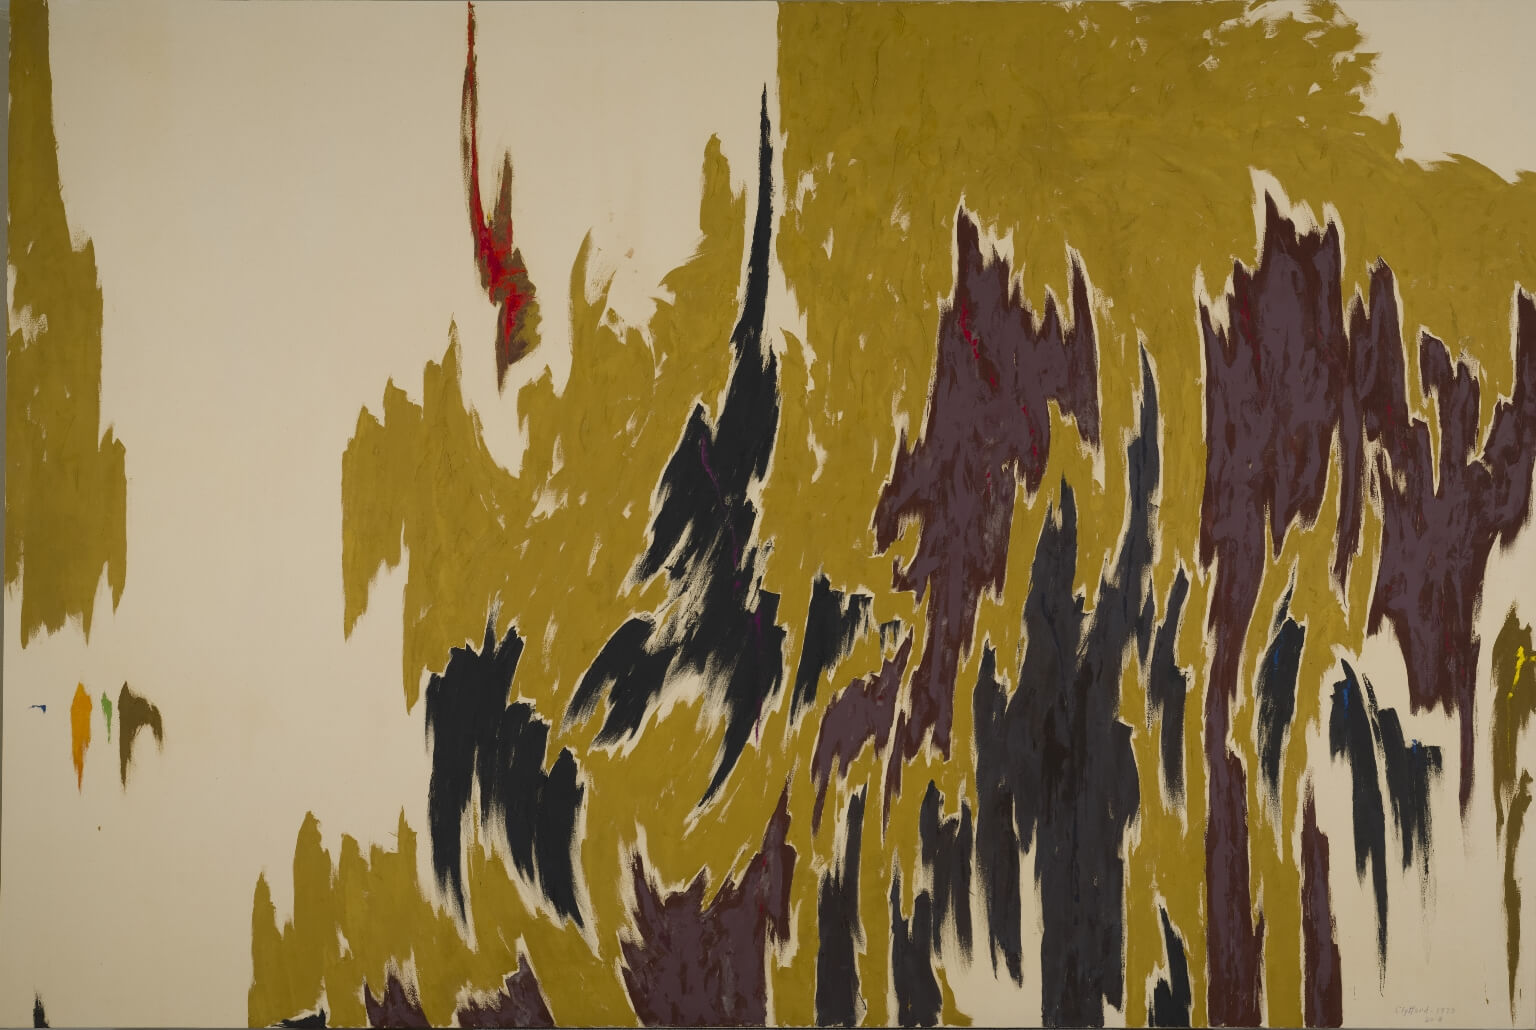 Abstract horizontal painting with some bare canvas and jagged shapes of gold, brown and black moving up like flames, and with highlights of red